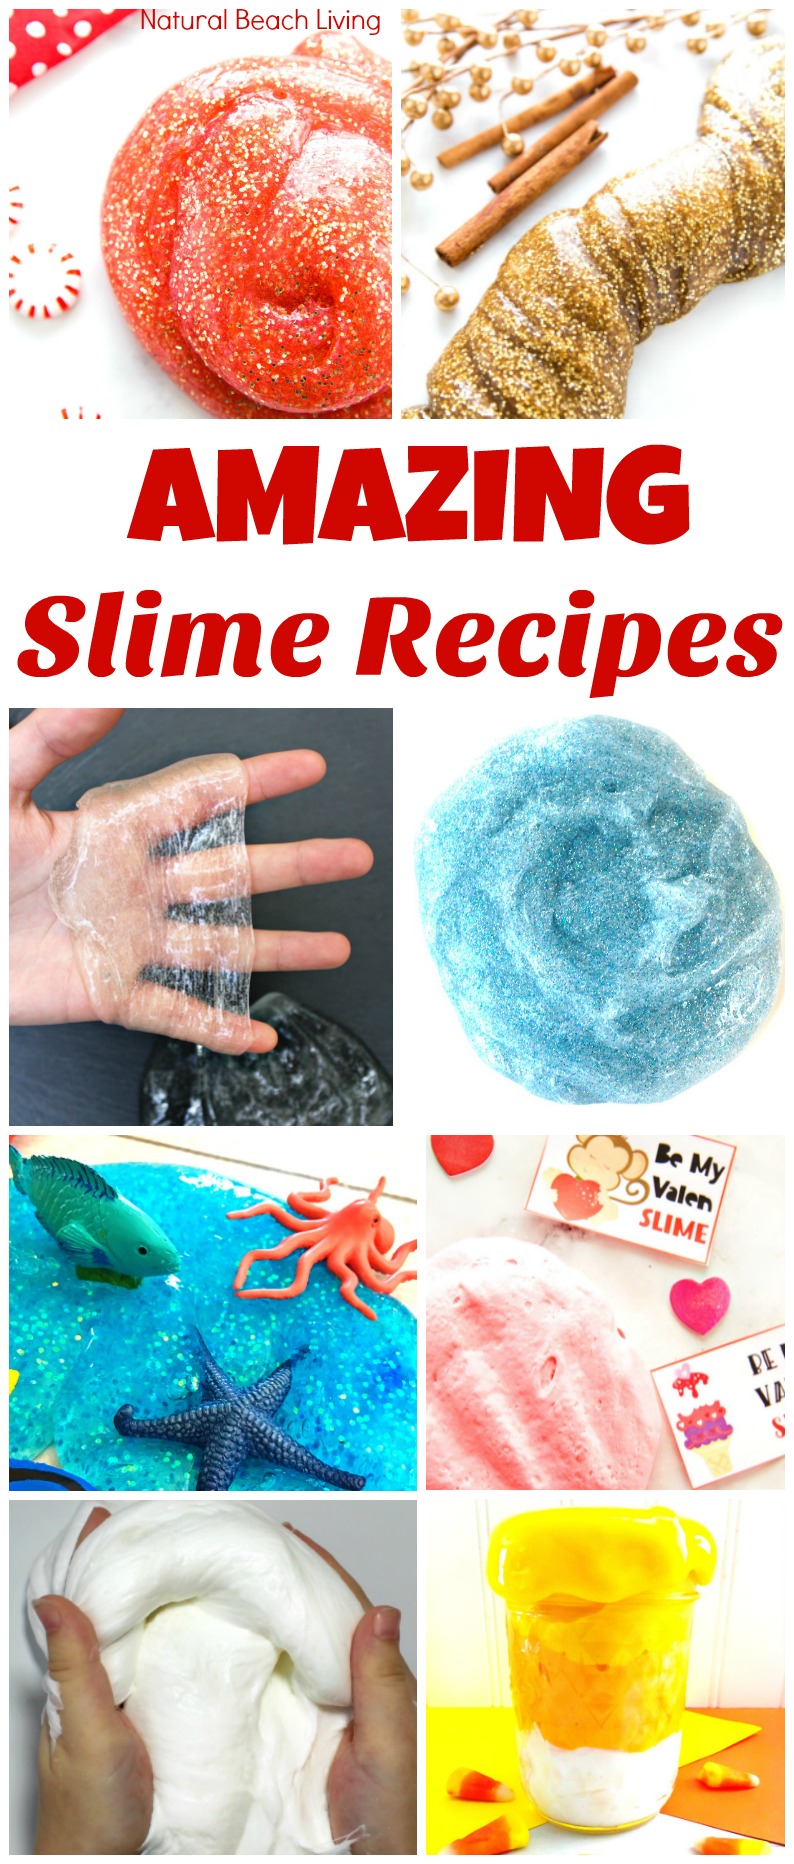 Best Slime Recipes, How to Make Slime Recipe with Contact Solution Kids Loves, Gold Glitter Slime, Gold Glitter Contact Solution Slime Recipe or Saline Solution slime with glue! One of the Best Sensory Play for Kids, Homemade slime is super easy to make with our slime recipes. The Best Ways to Make Slime, Easy Slime Recipe